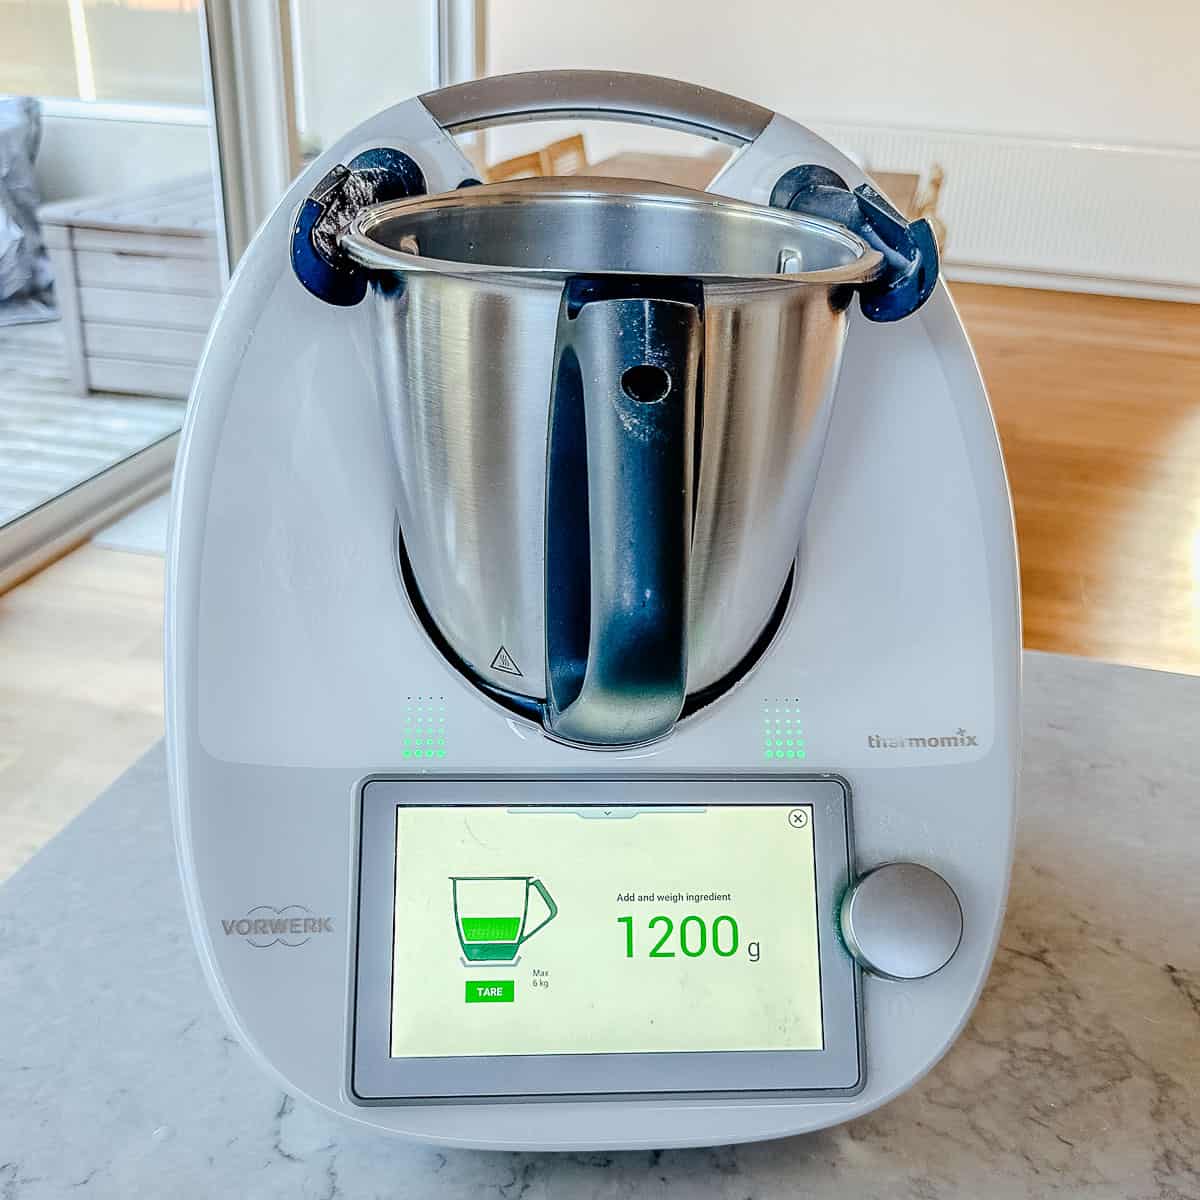 A Thermomix with 1200g of water in it.